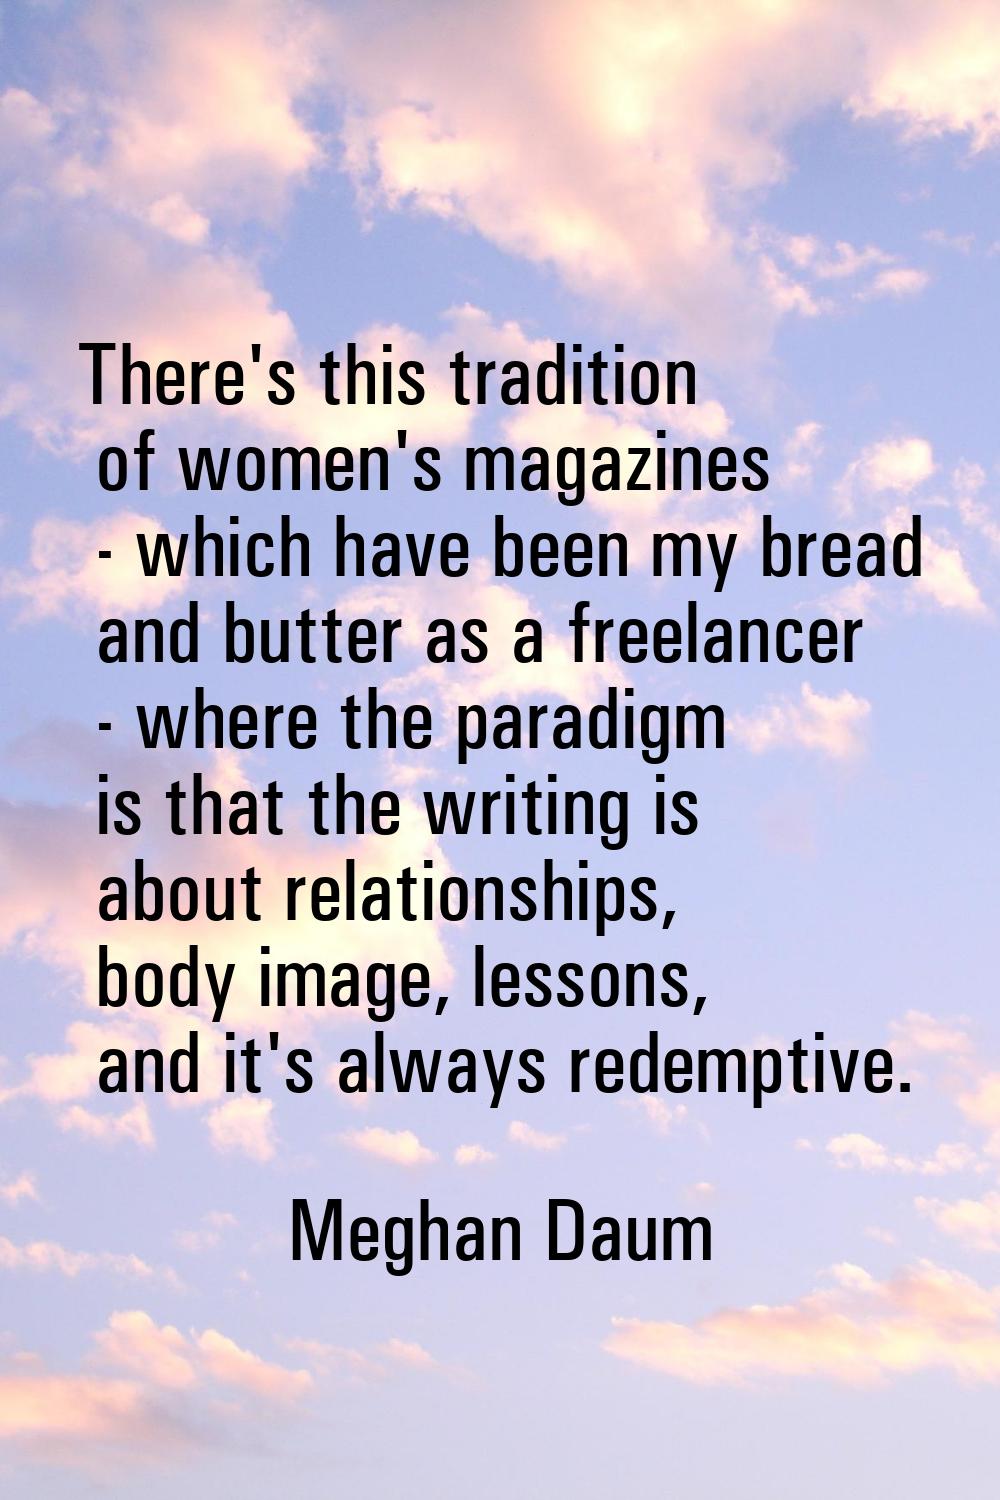 There's this tradition of women's magazines - which have been my bread and butter as a freelancer -